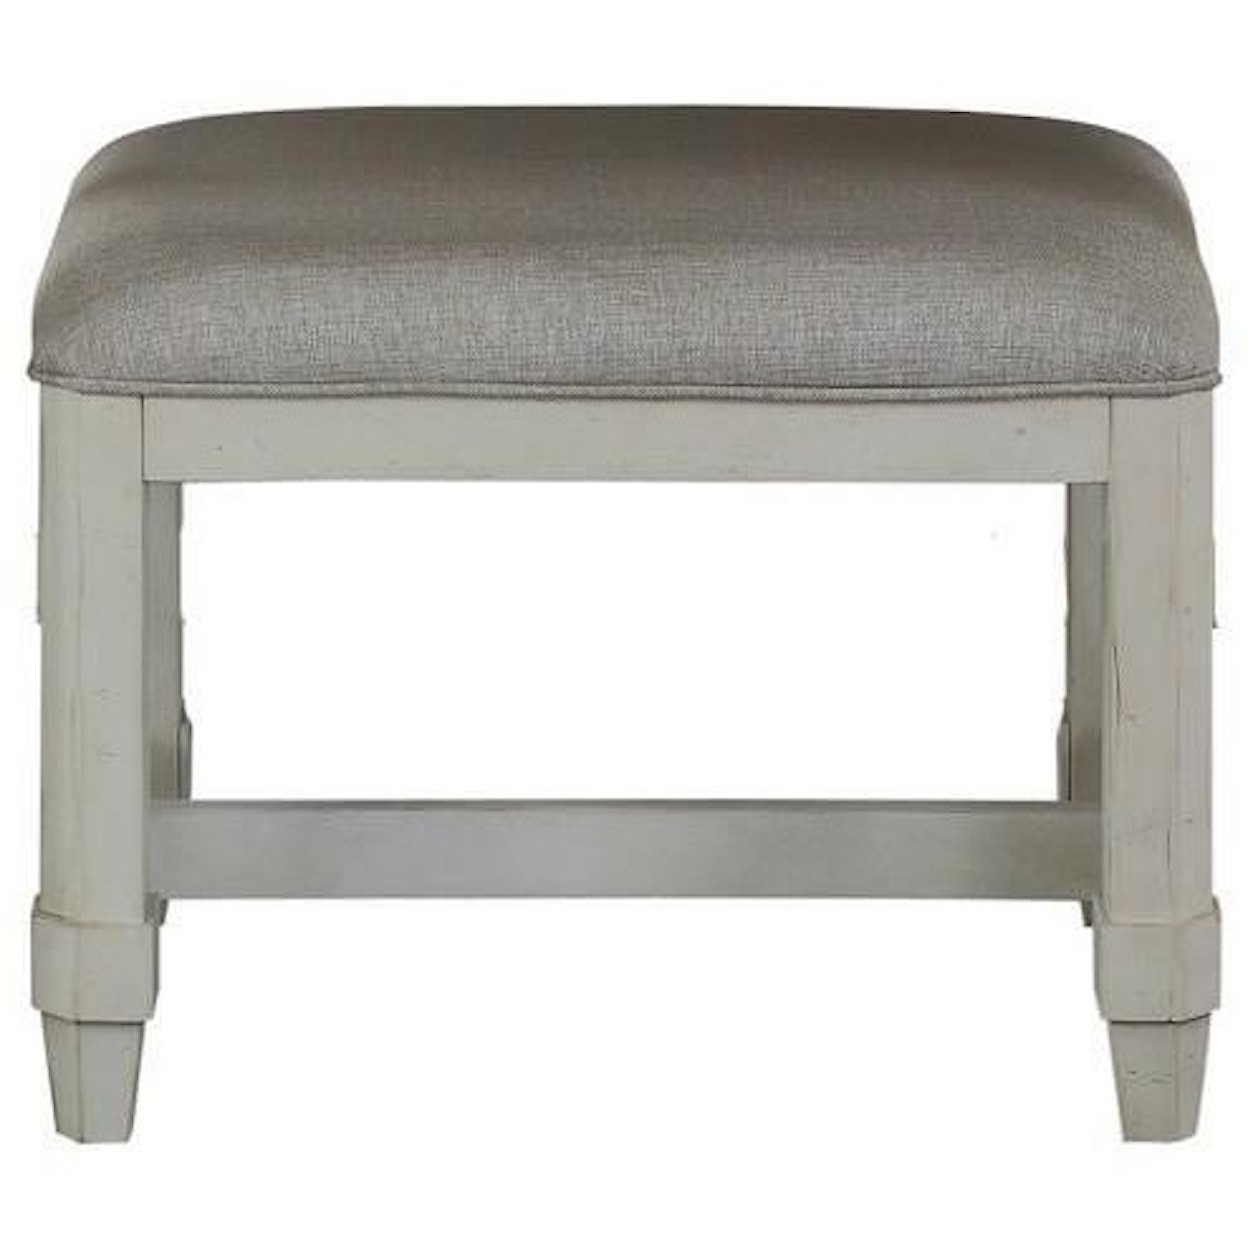 Panama Jack by Palmetto Home Millbrook Bed Bench